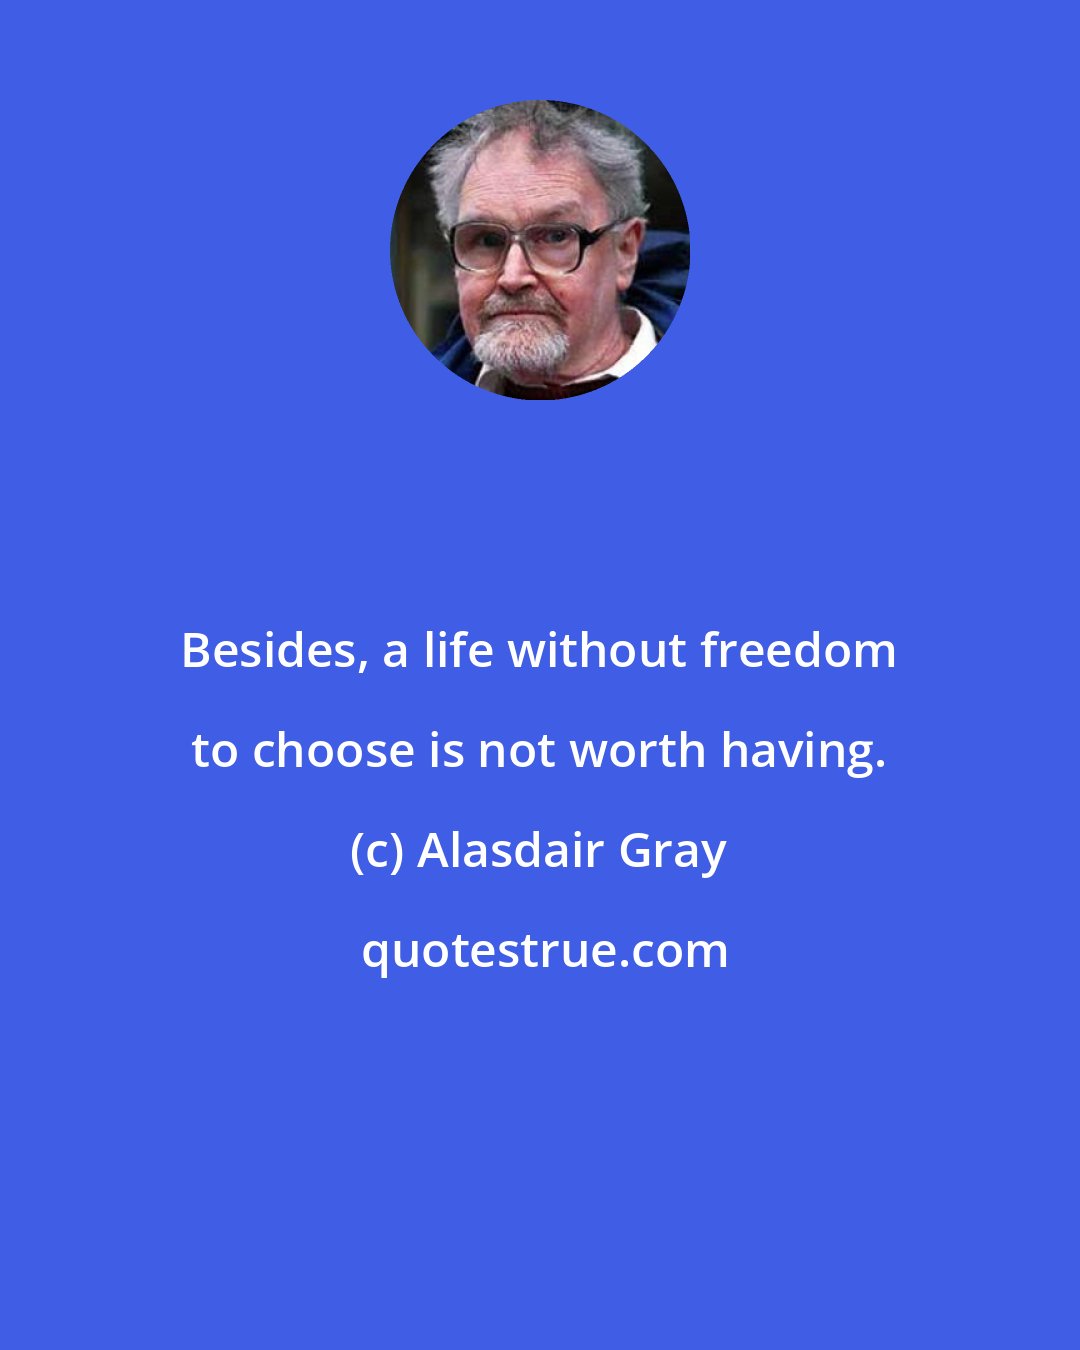 Alasdair Gray: Besides, a life without freedom to choose is not worth having.